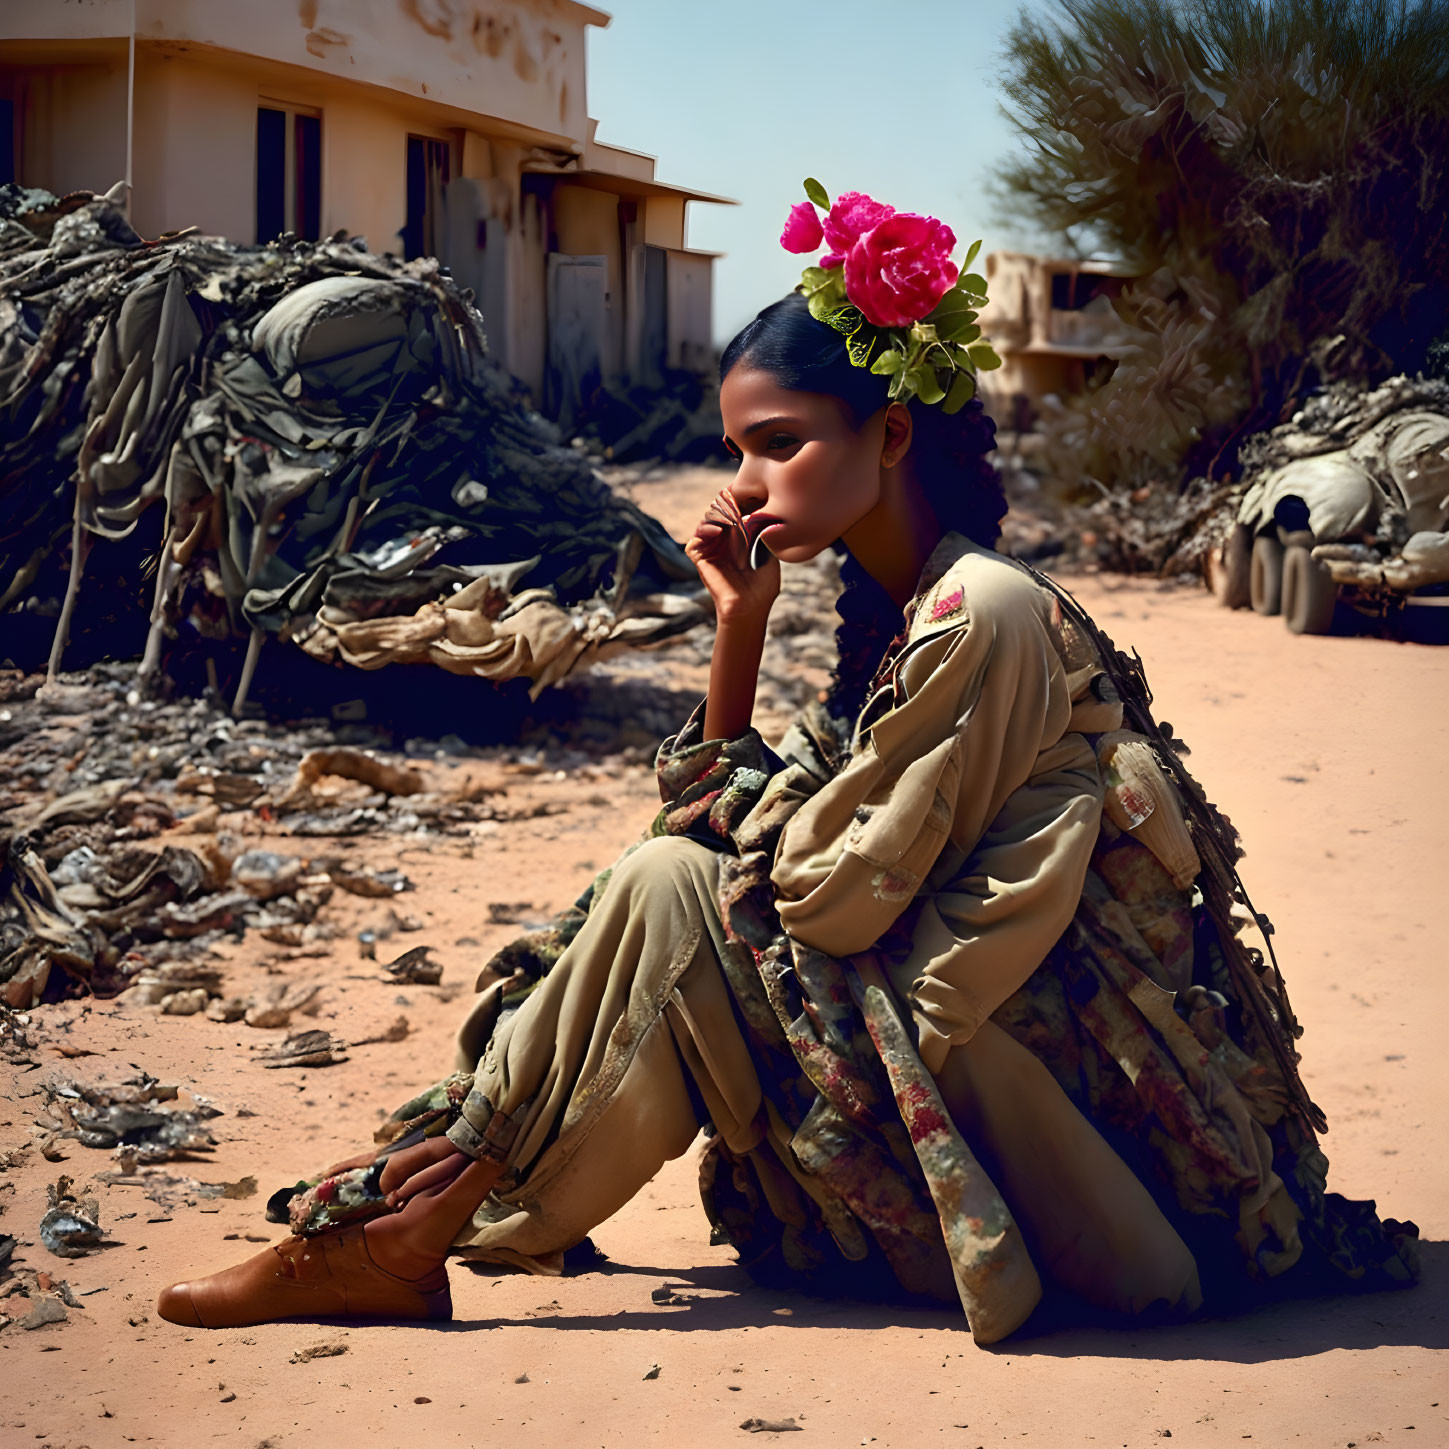 Person in military outfit with flower crown in desert ruins